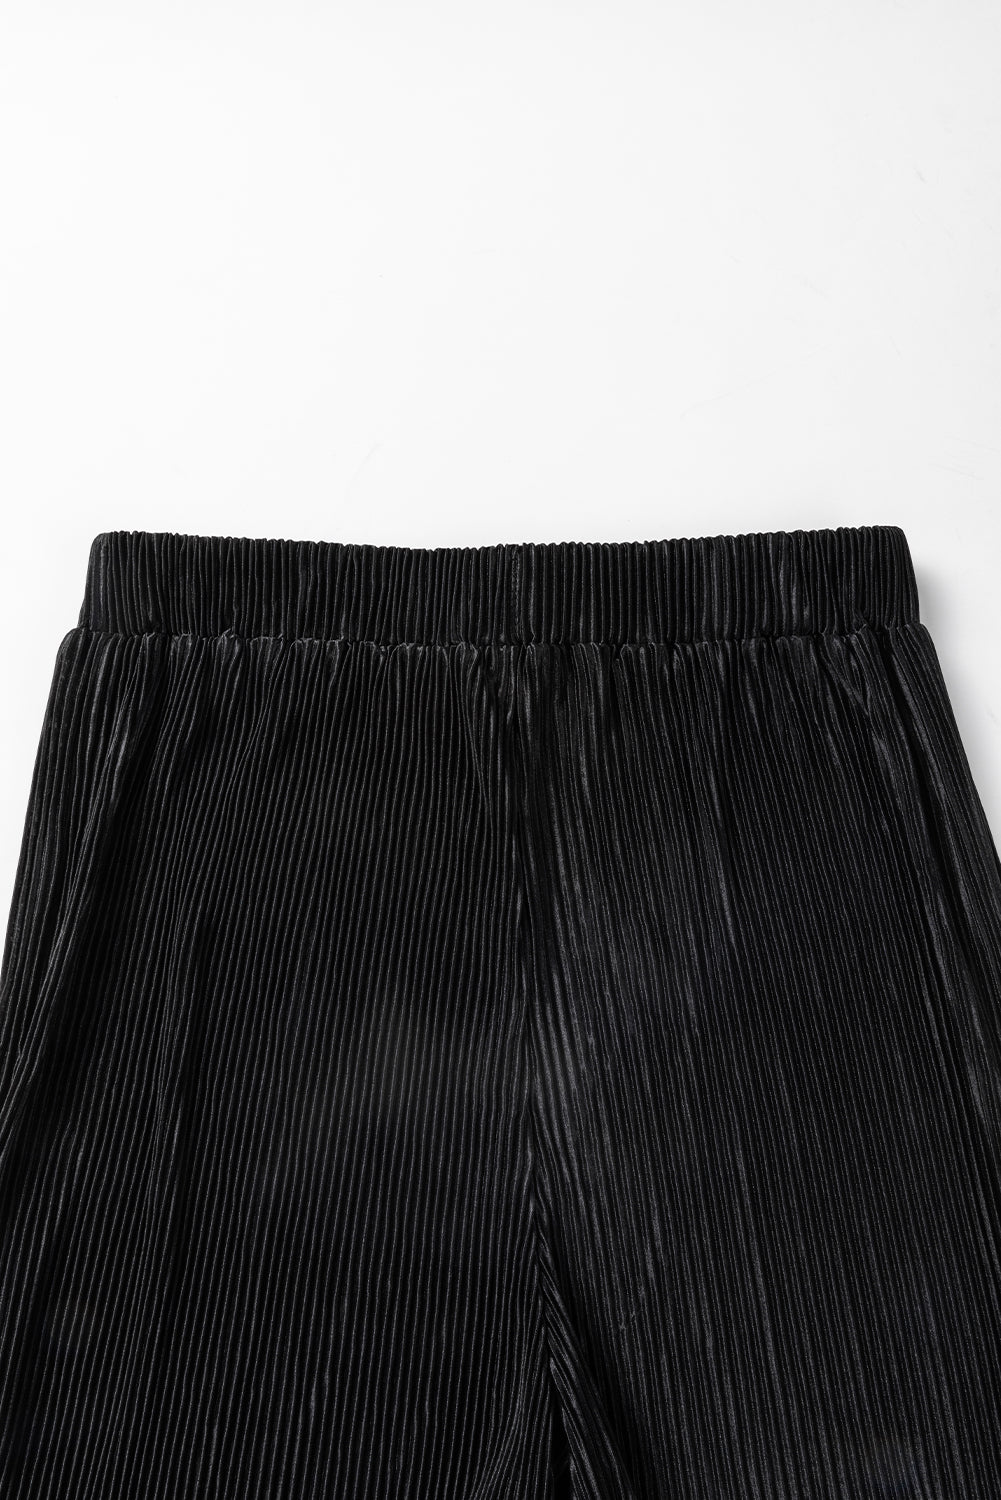 Black Corded Cropped Pullover and Wide Leg Pants Set